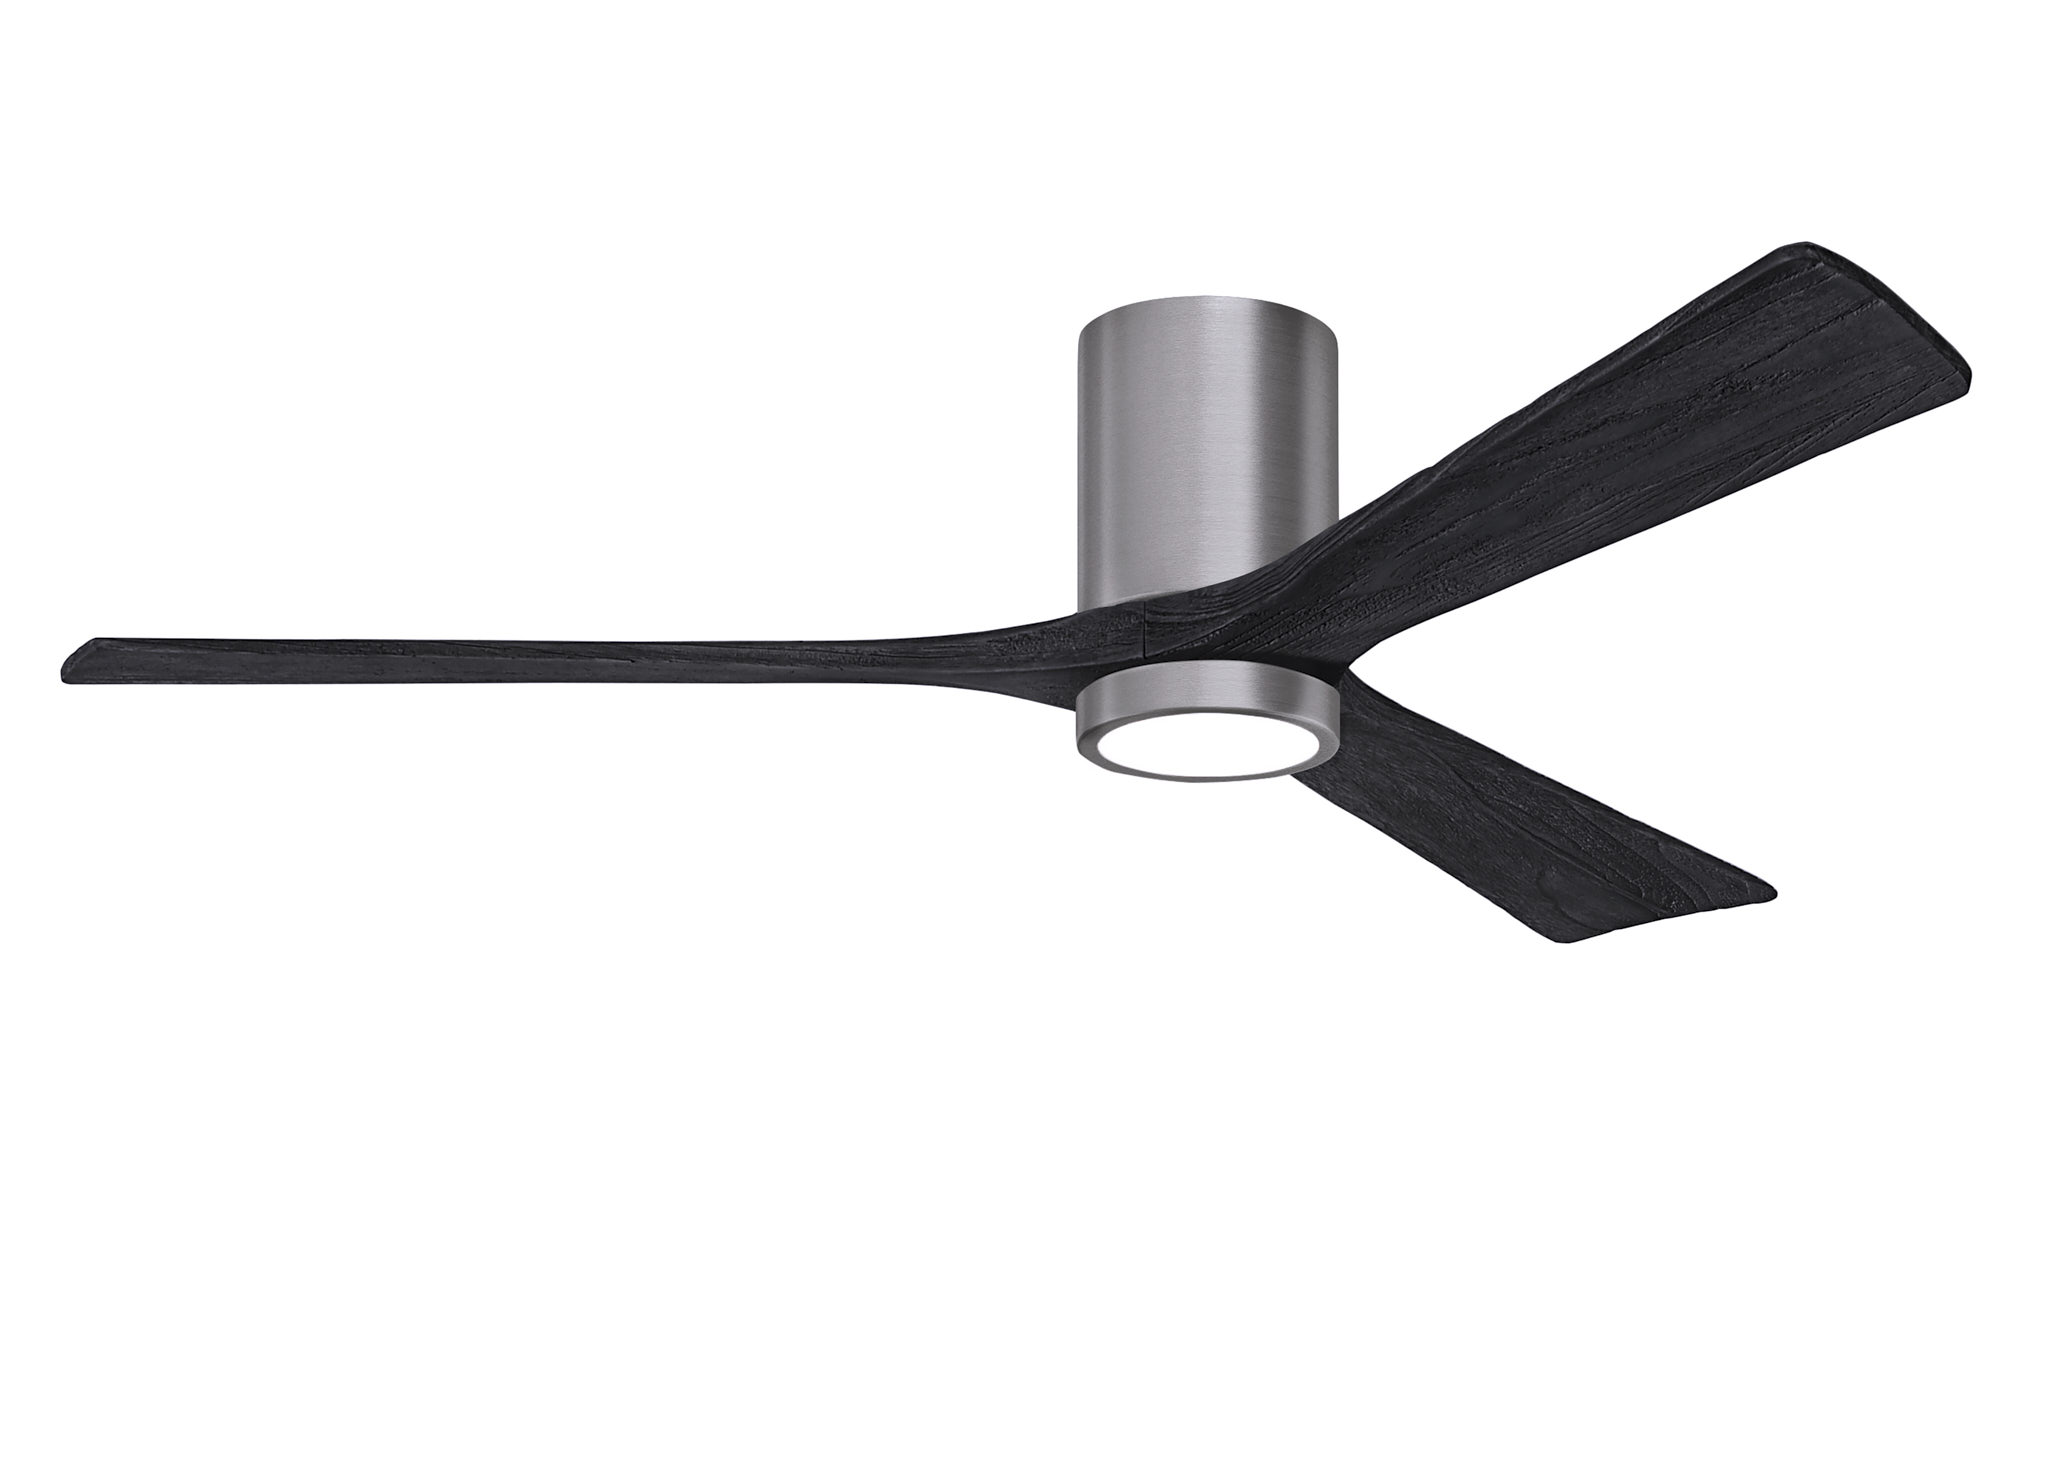 Irene-3HLK 6-speed ceiling fan in brushed pewter finish with 60